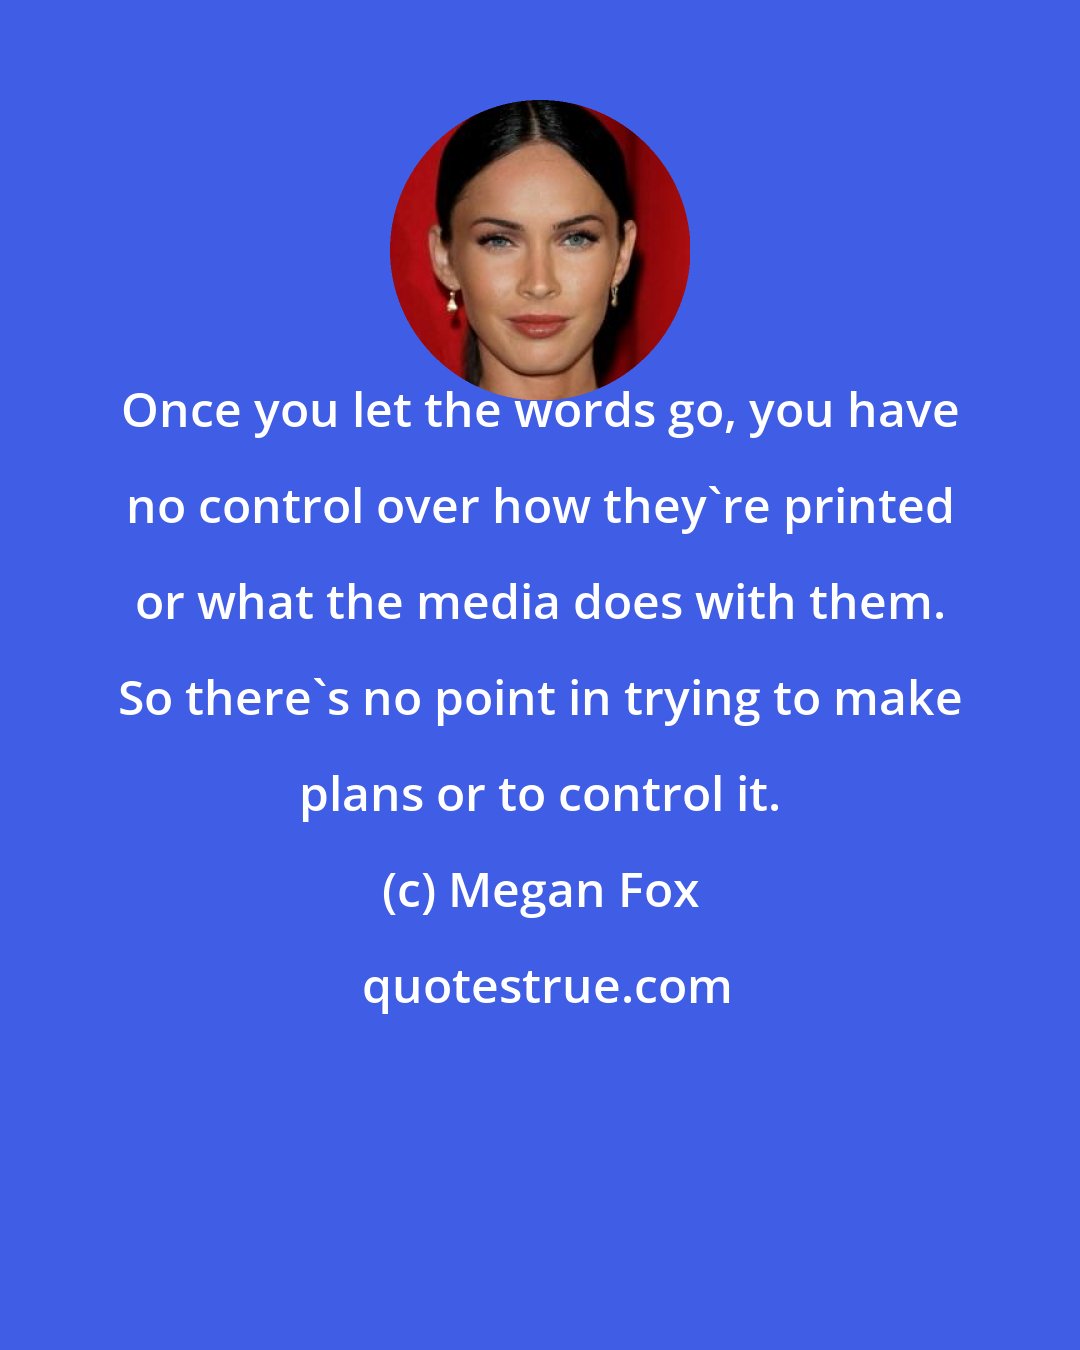 Megan Fox: Once you let the words go, you have no control over how they're printed or what the media does with them. So there's no point in trying to make plans or to control it.